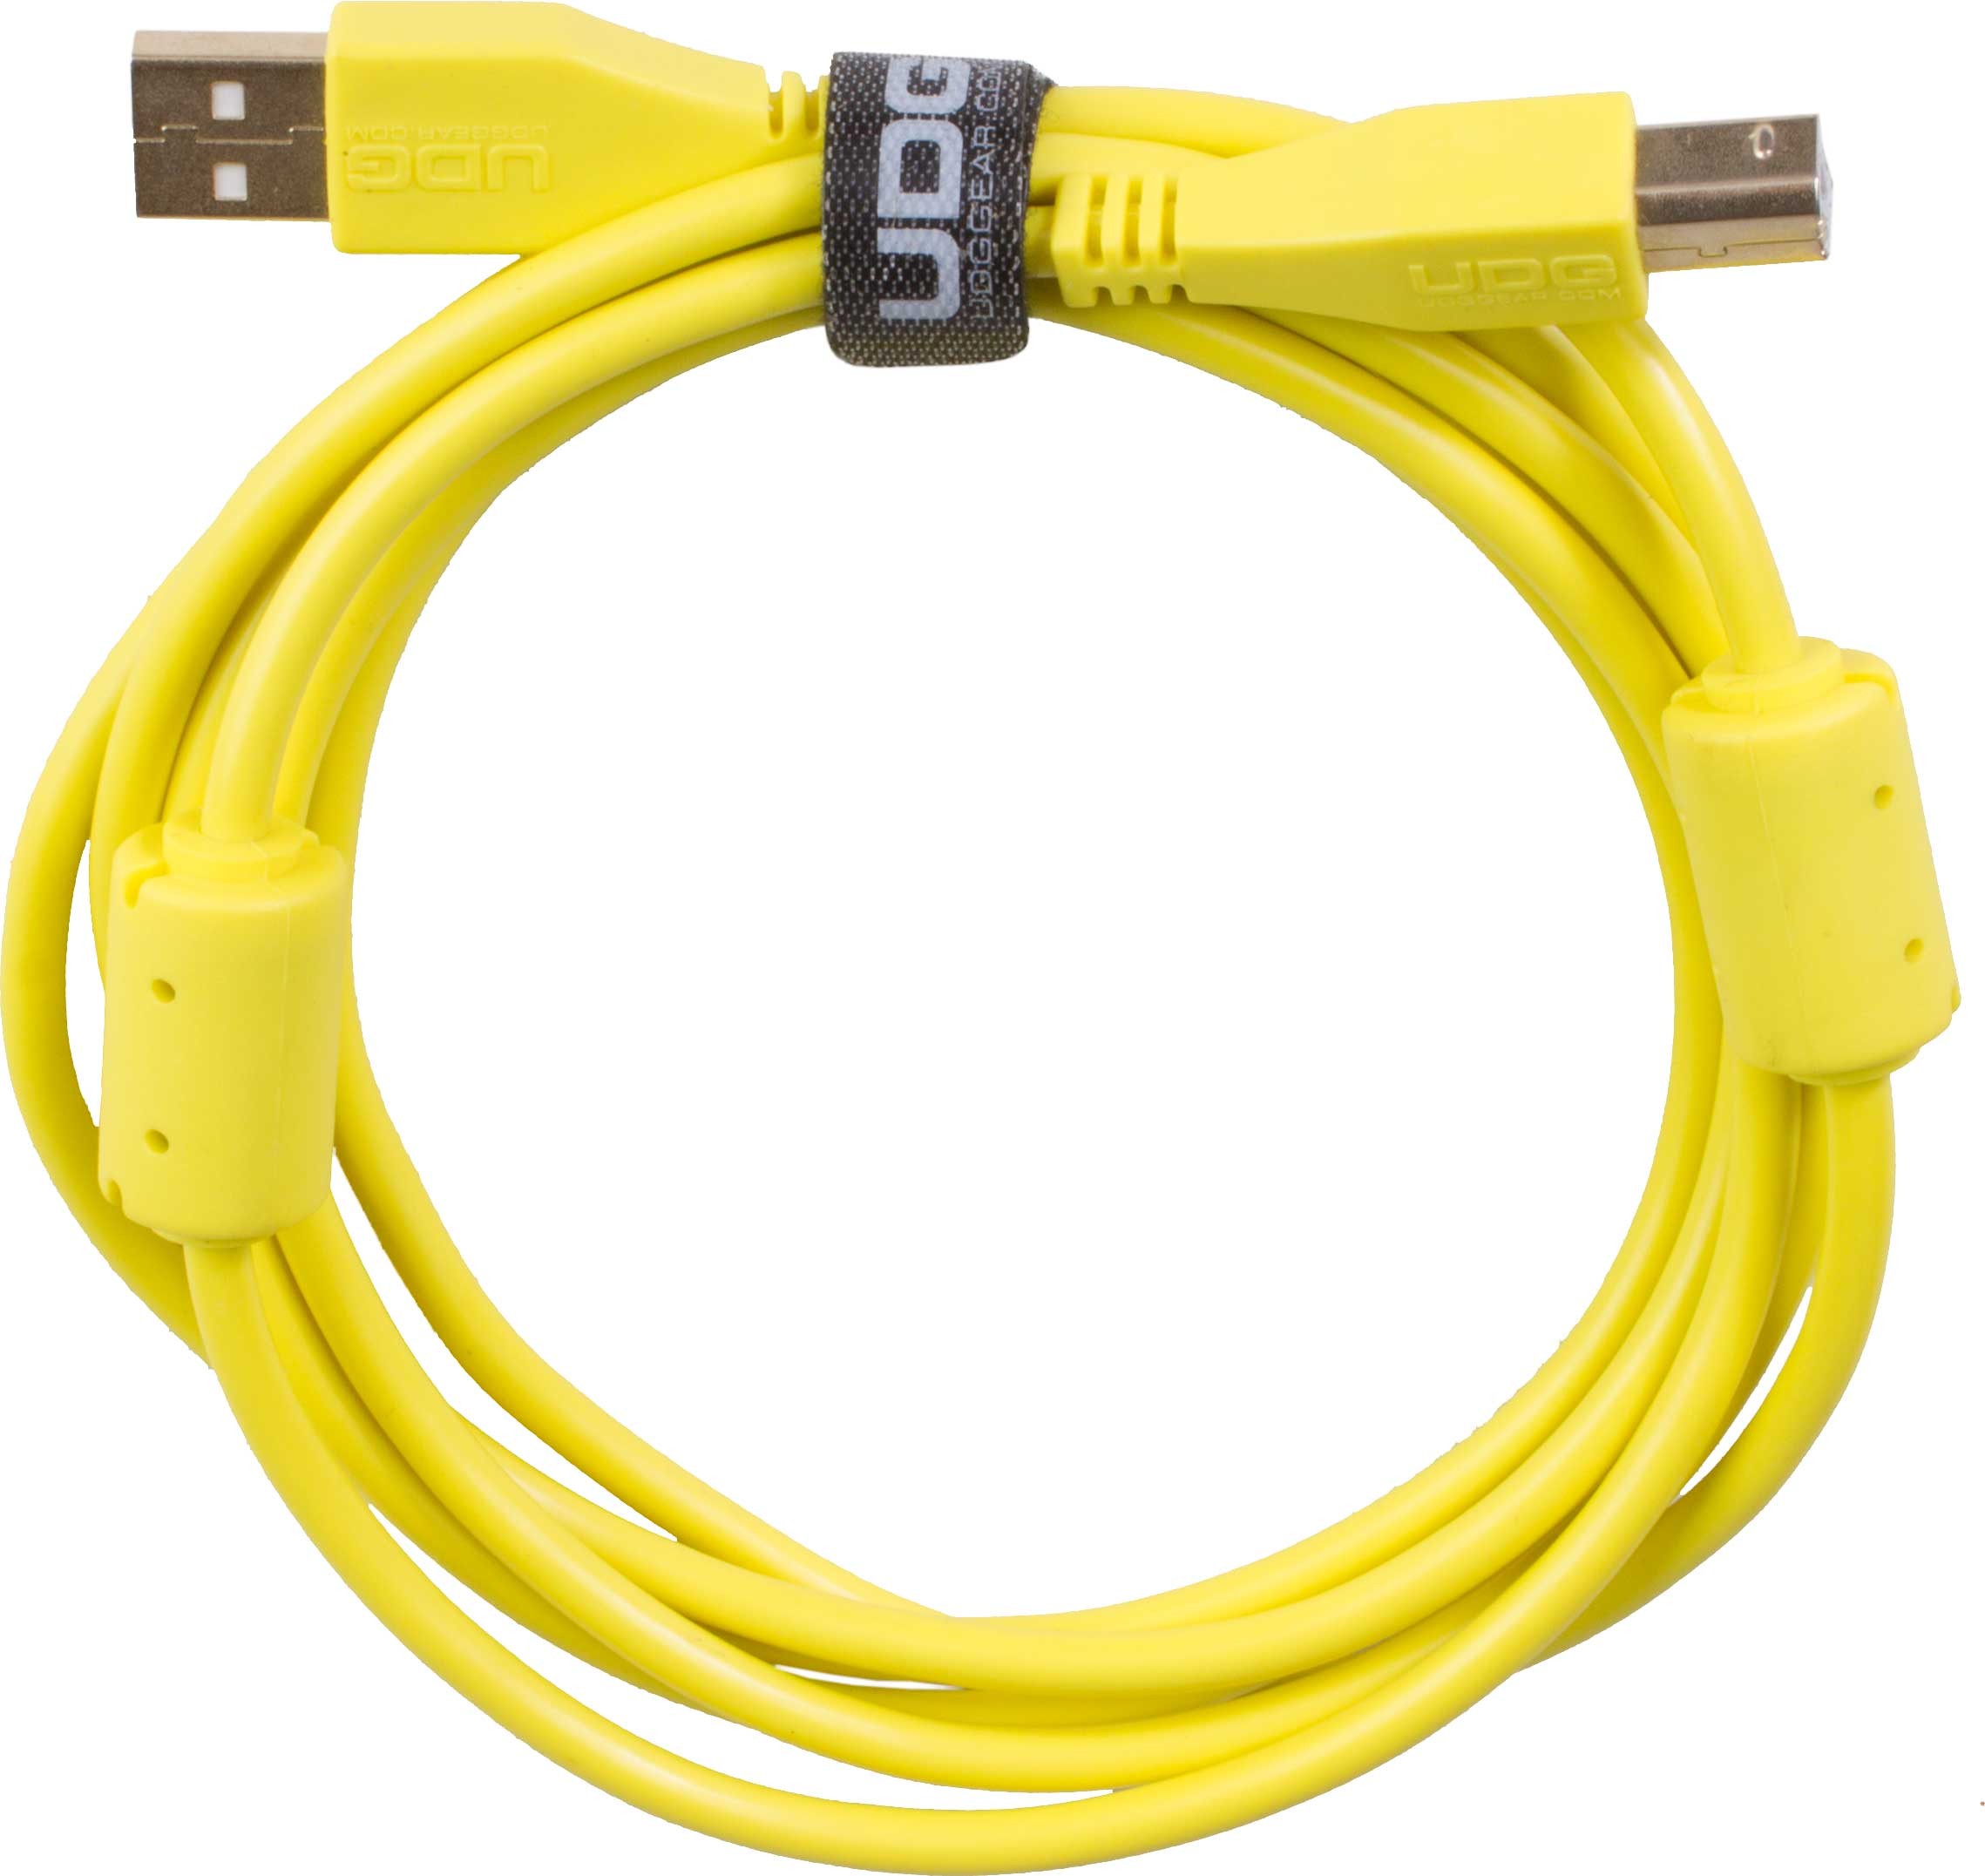 UDG U95002YL - ULTIMATE AUDIO CABLE USB 2.0 A-B YELLOW STRAIGHT 2M